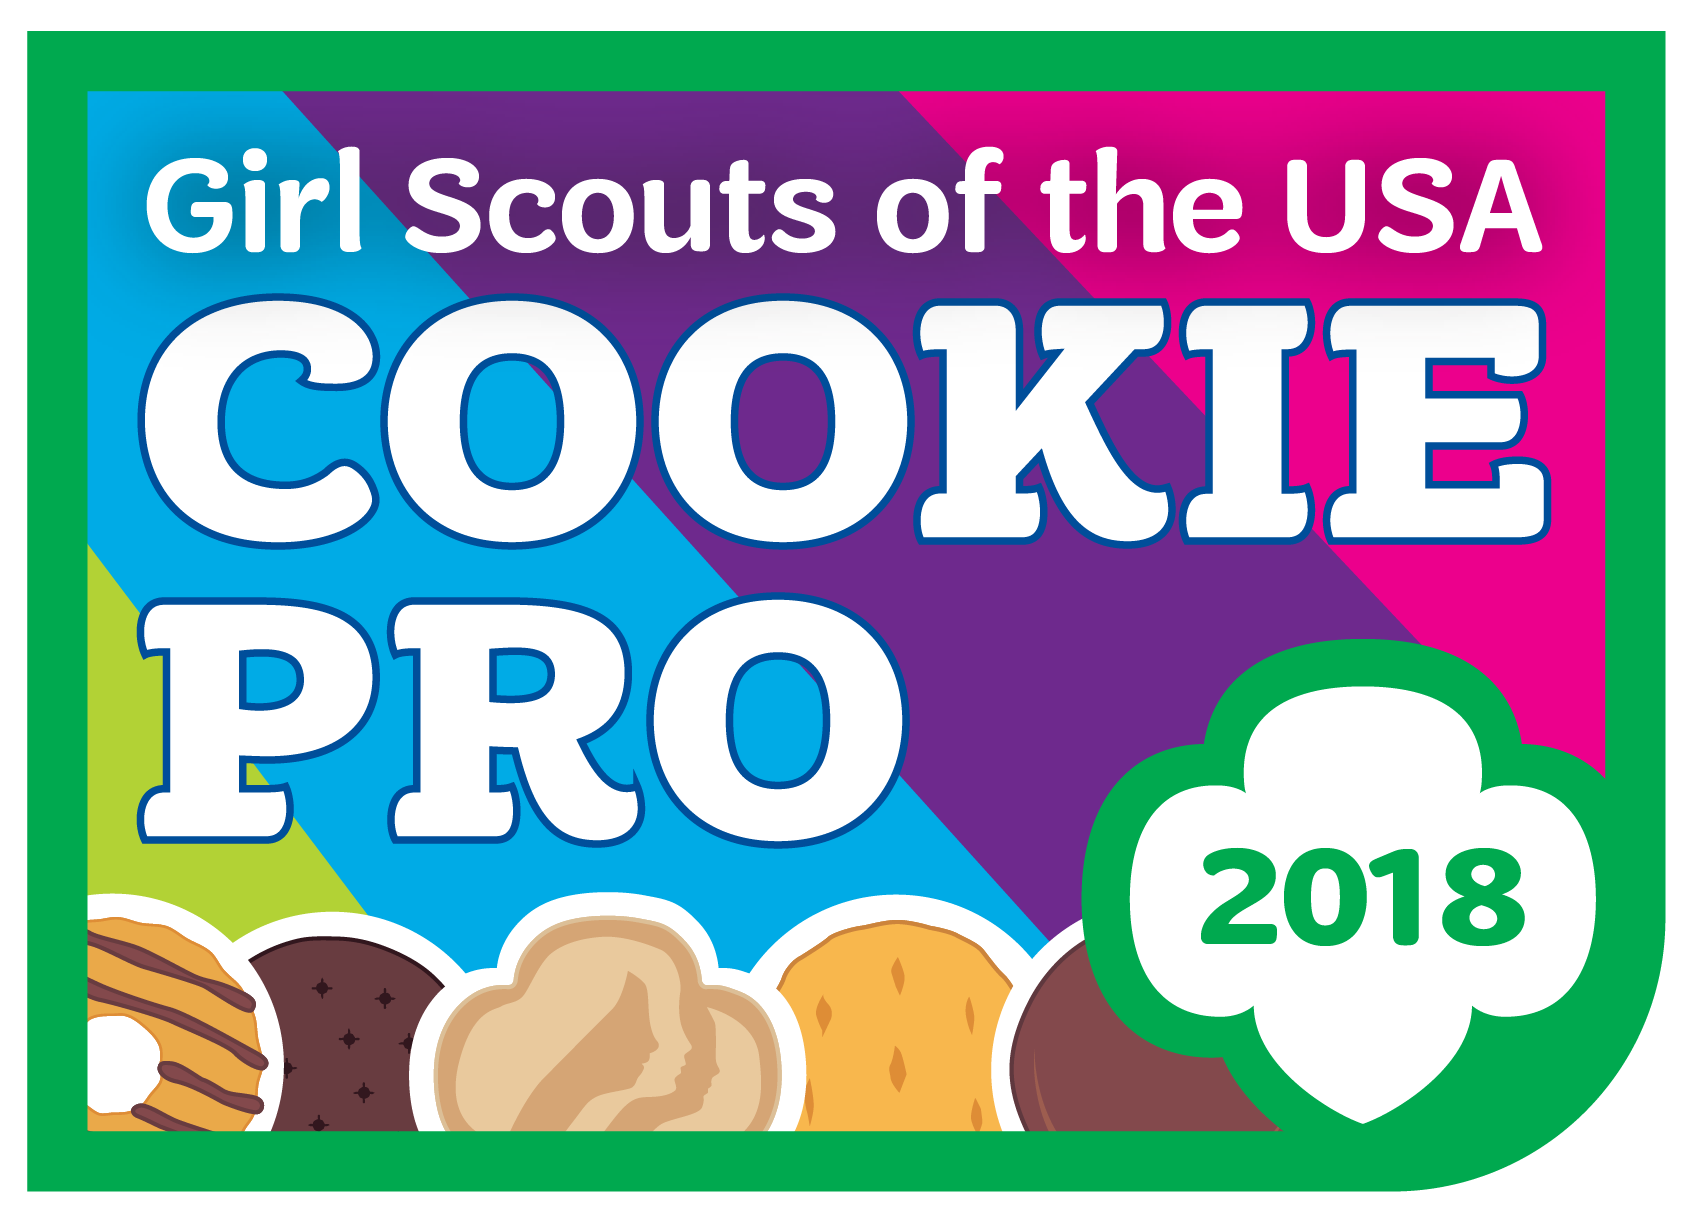 Cookie Pro. Girl Scout cookies. Детская программа cookies. Girl Scouts sell cookies helping Pets. Cookie scouts